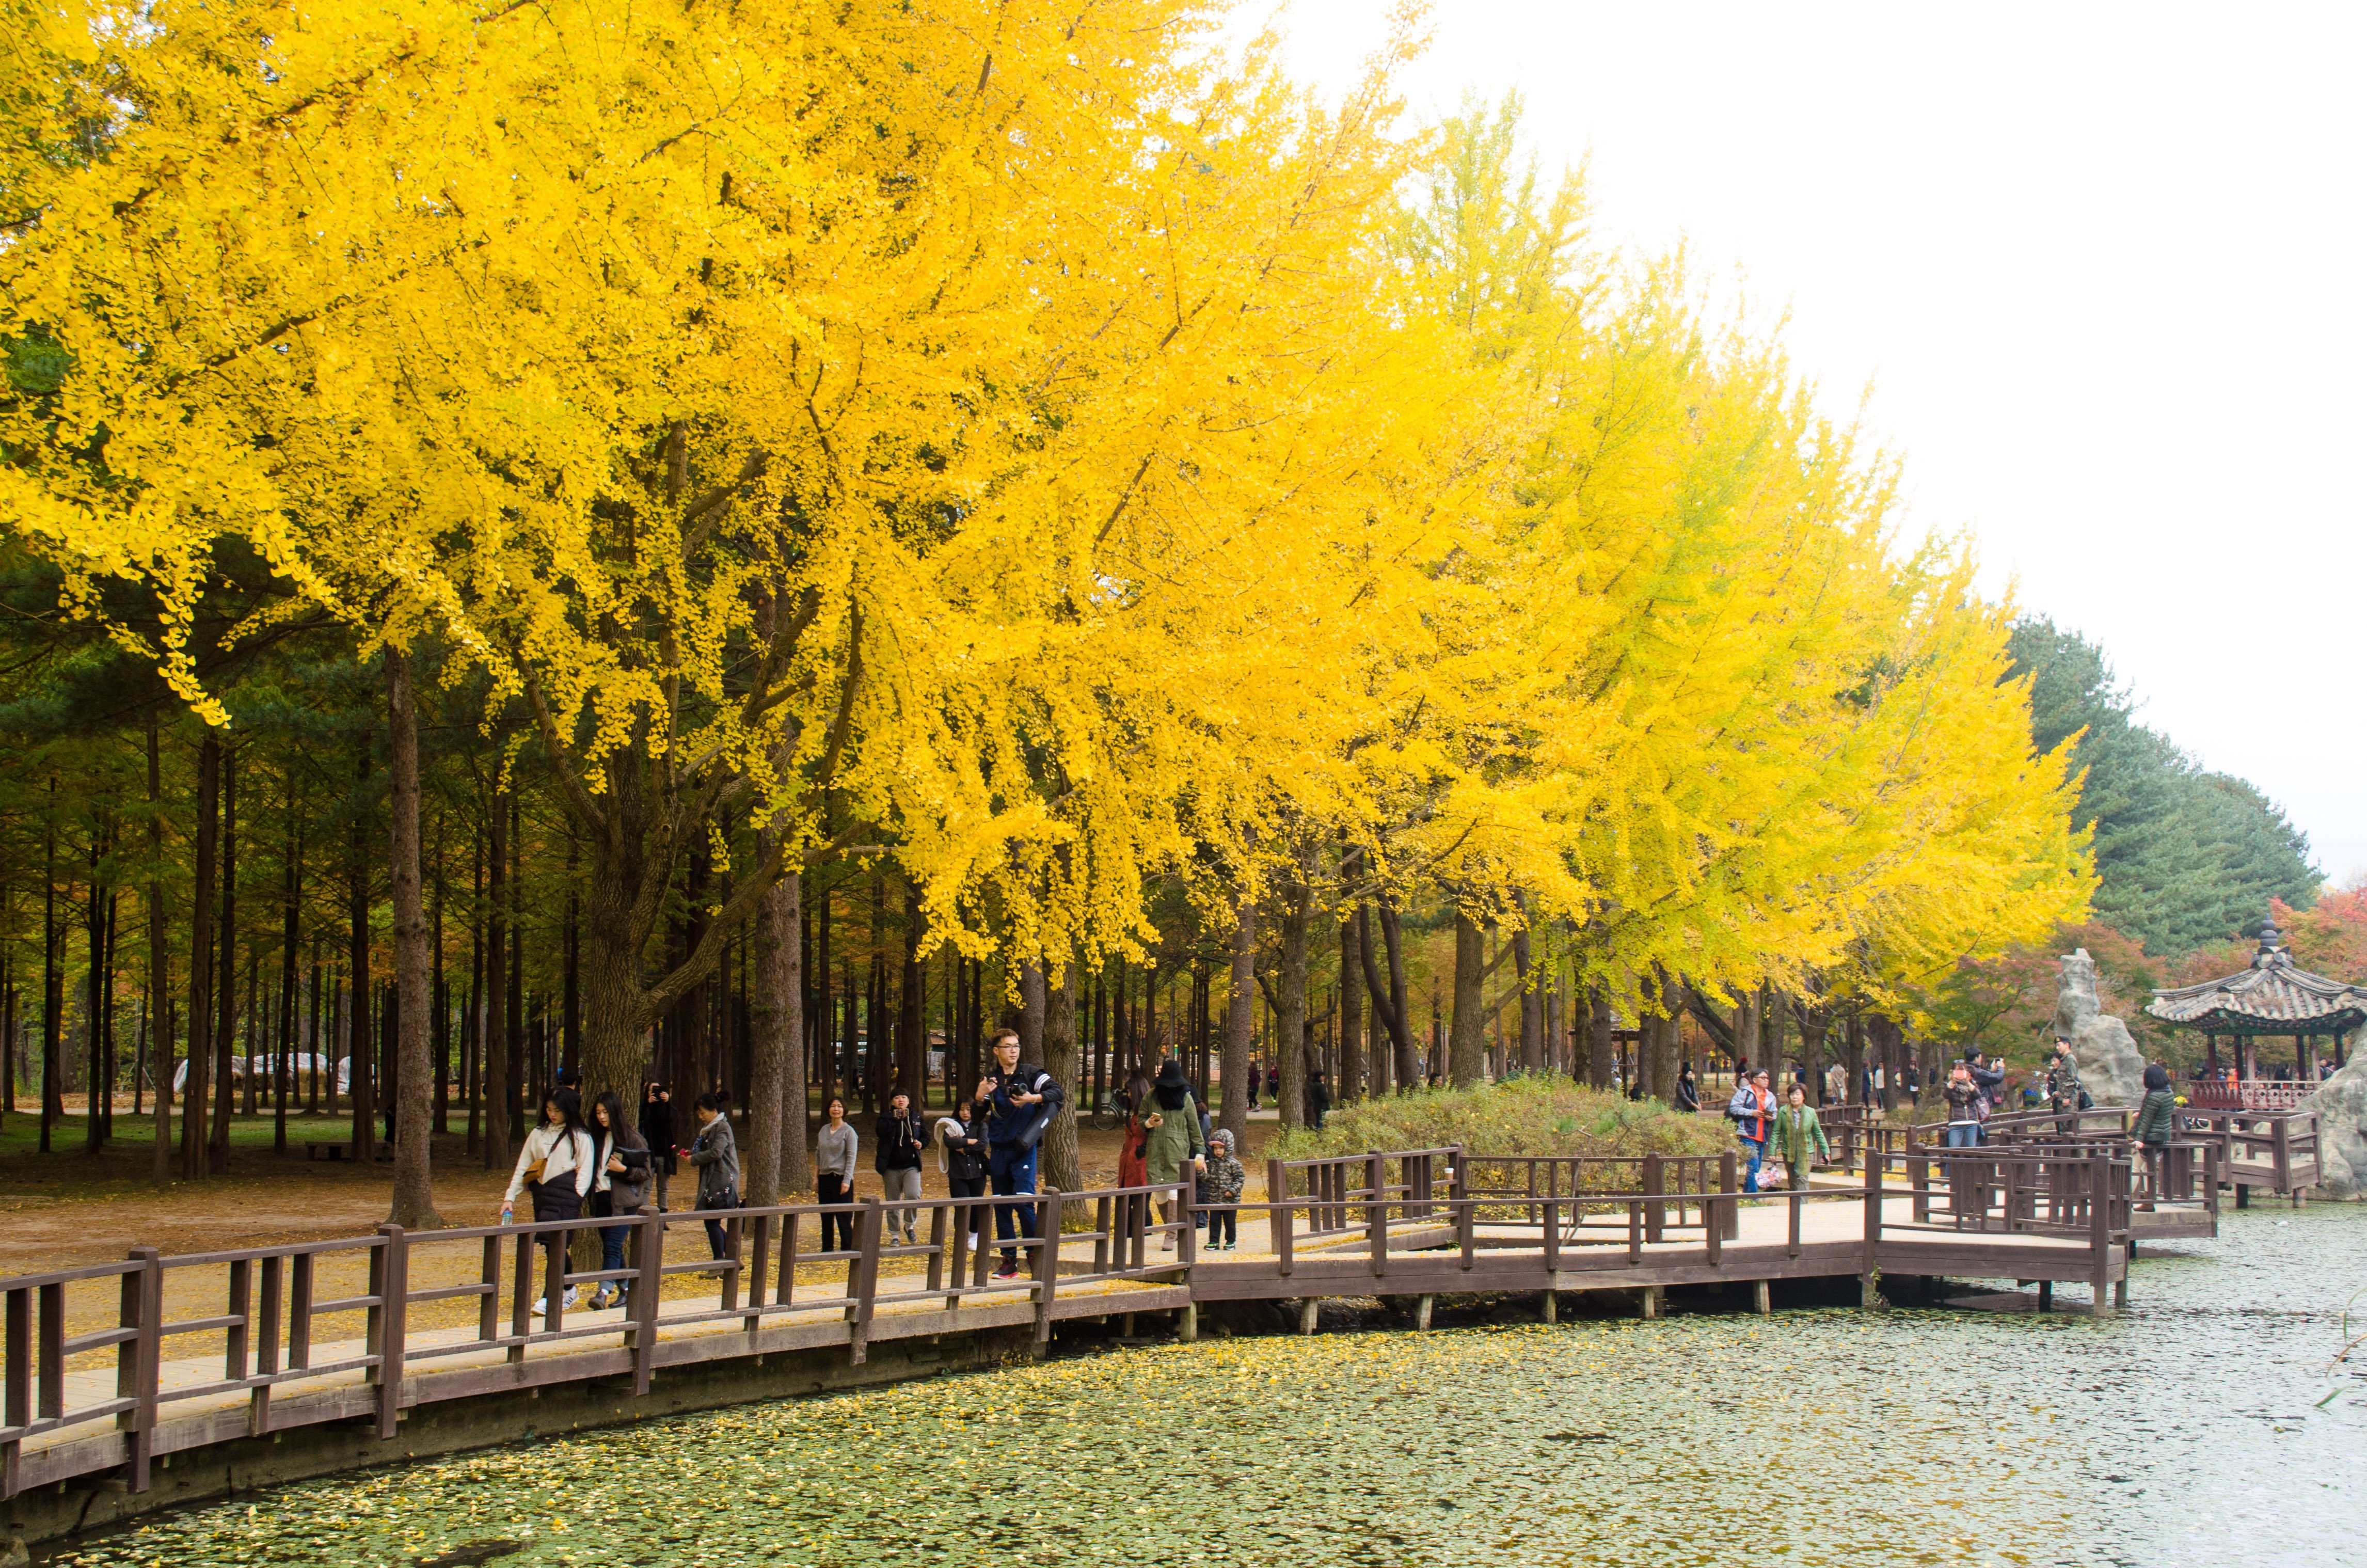 NAMI ISLAND. Nami Island is one of the spots near South Korea that tourists can visit. Photo by Tomi Setianto  